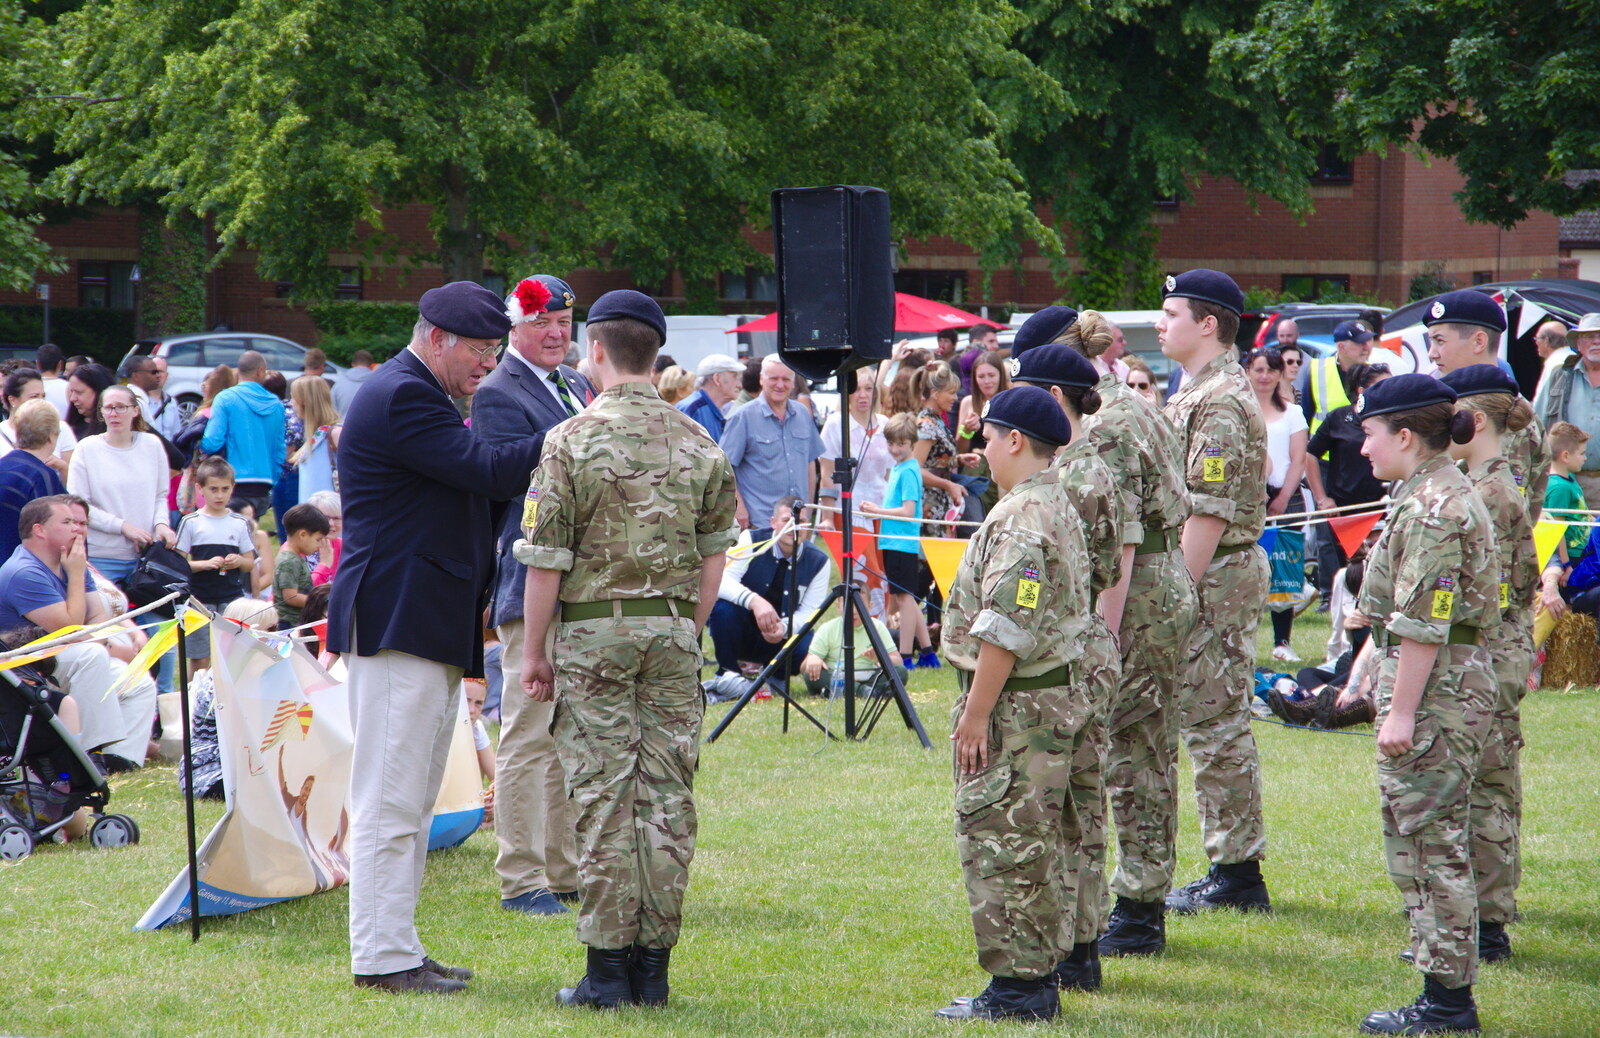 There's some sort of Army Cadet presentation from The Diss Carnival 2019, Diss, Norfolk - 9th June 2019